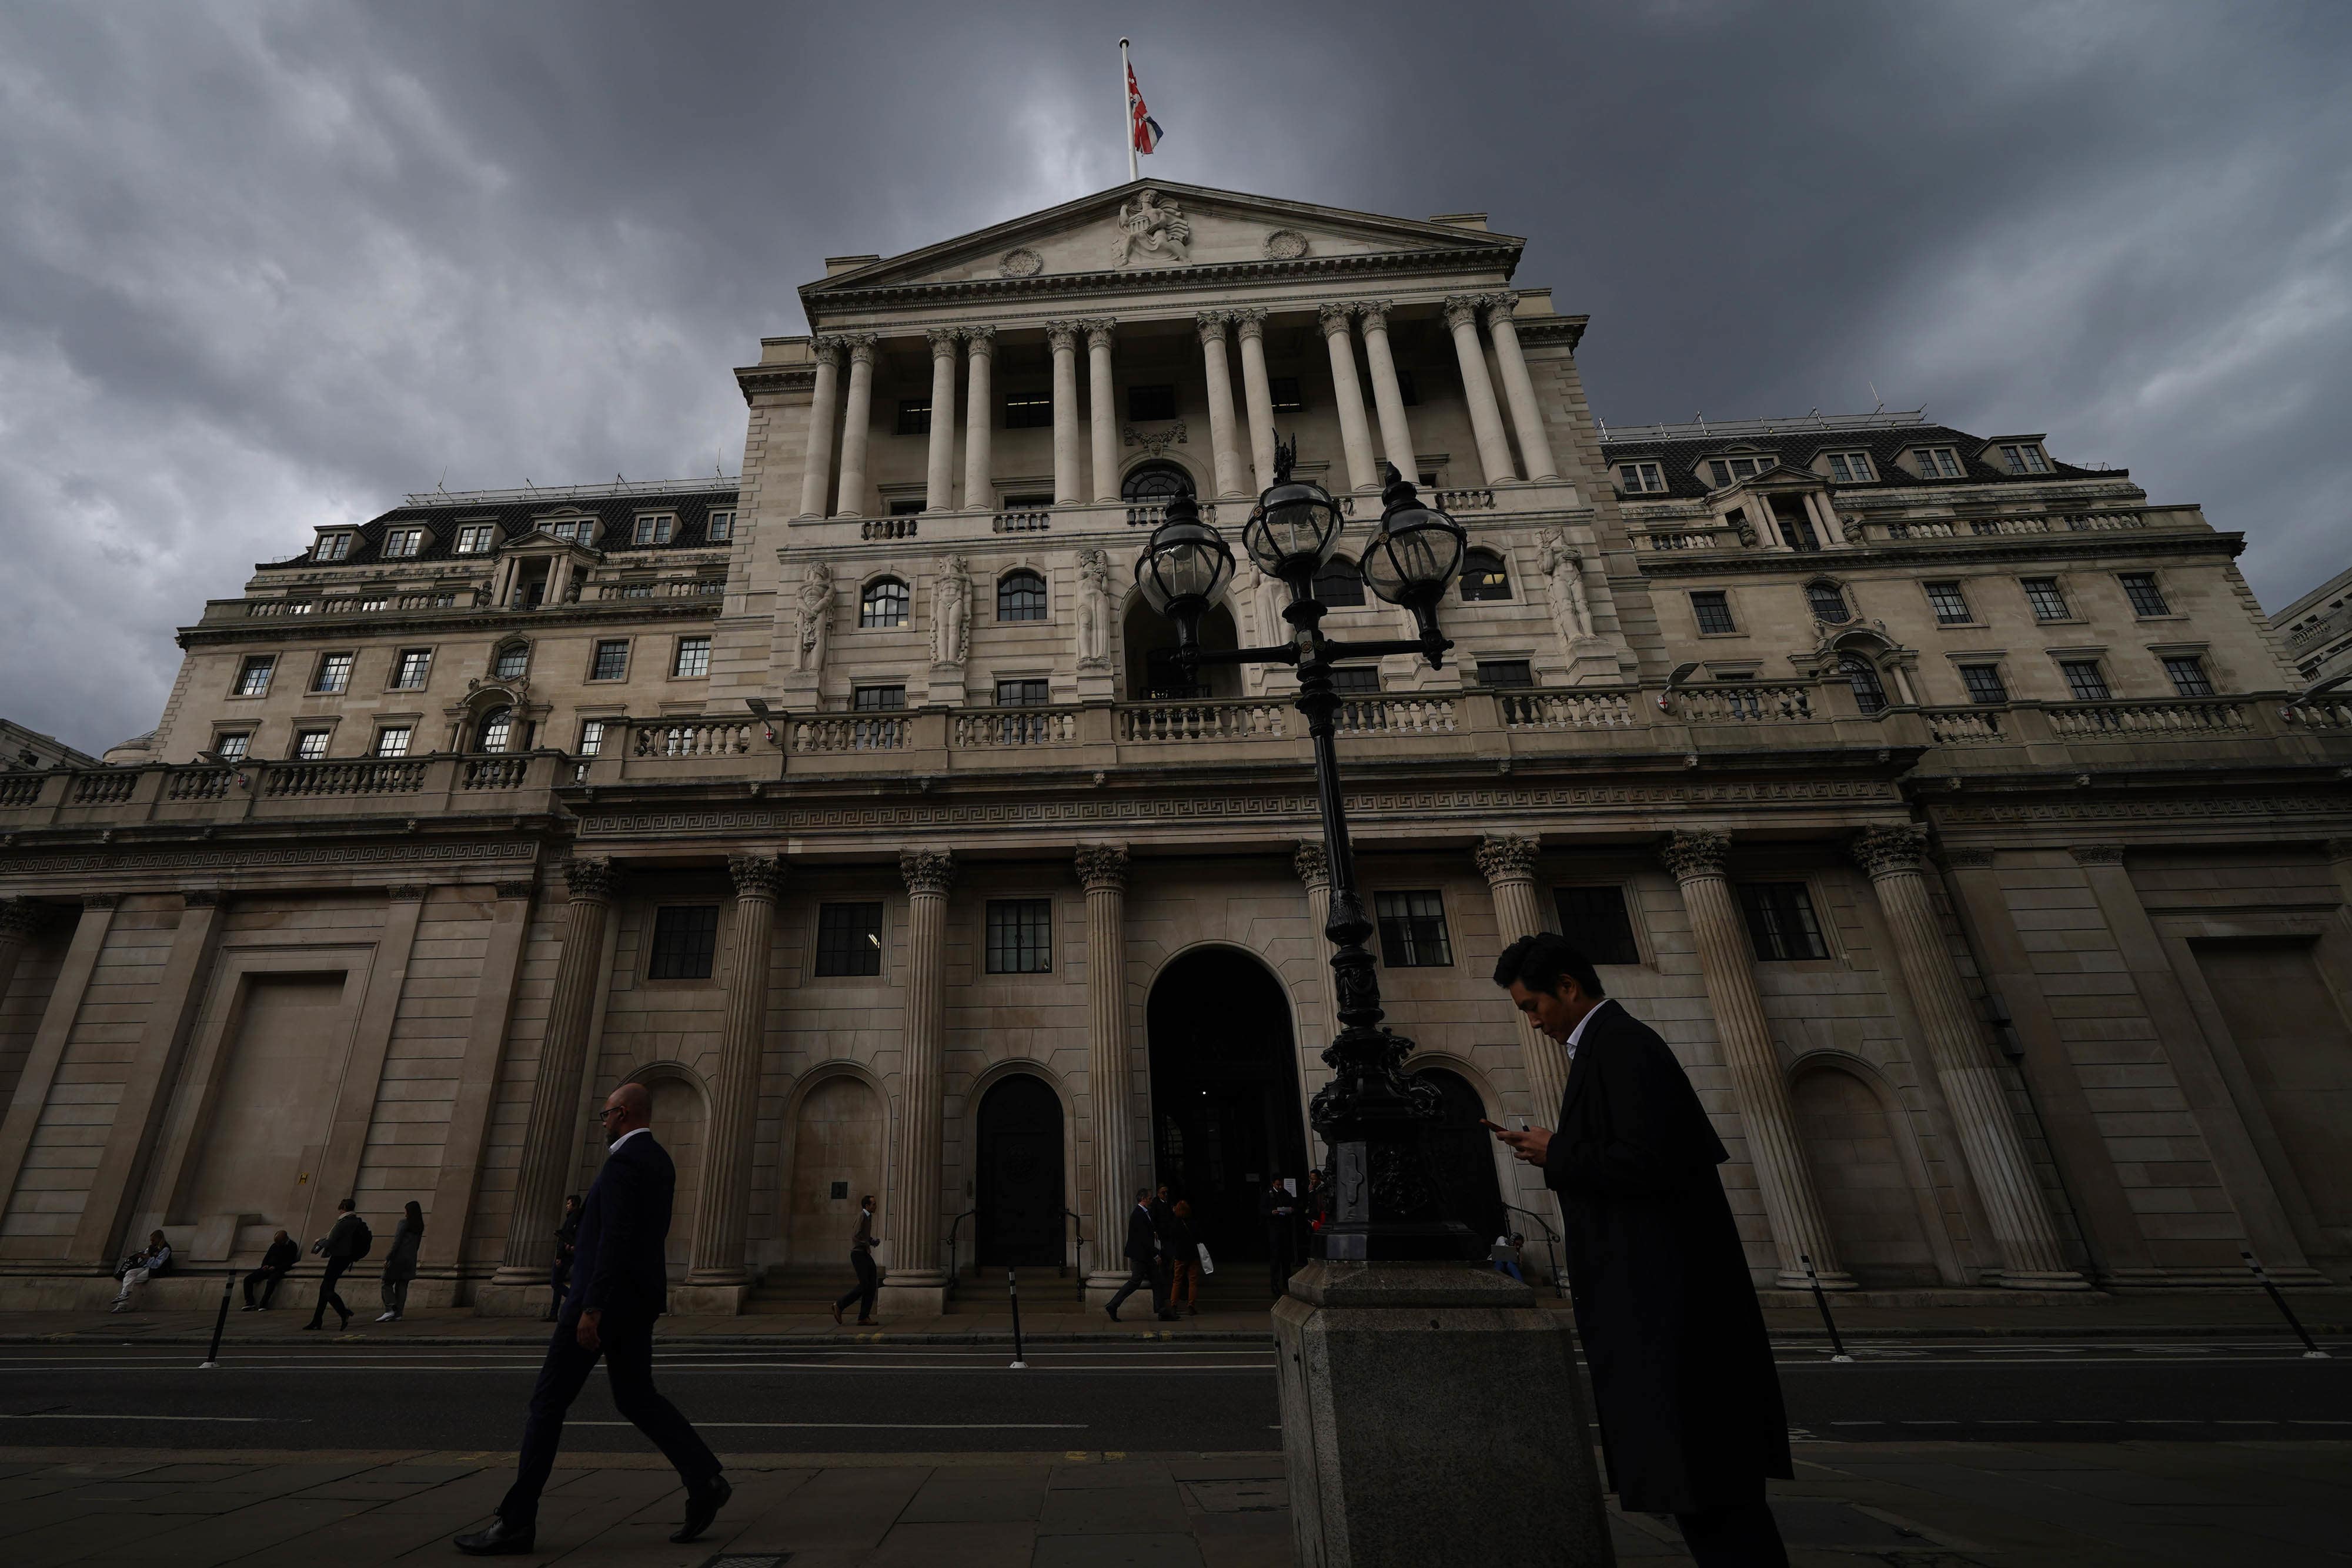 The Bank of England has raised interest rates for the 10th time in a row, lumping further pressure on mortgage borrowers